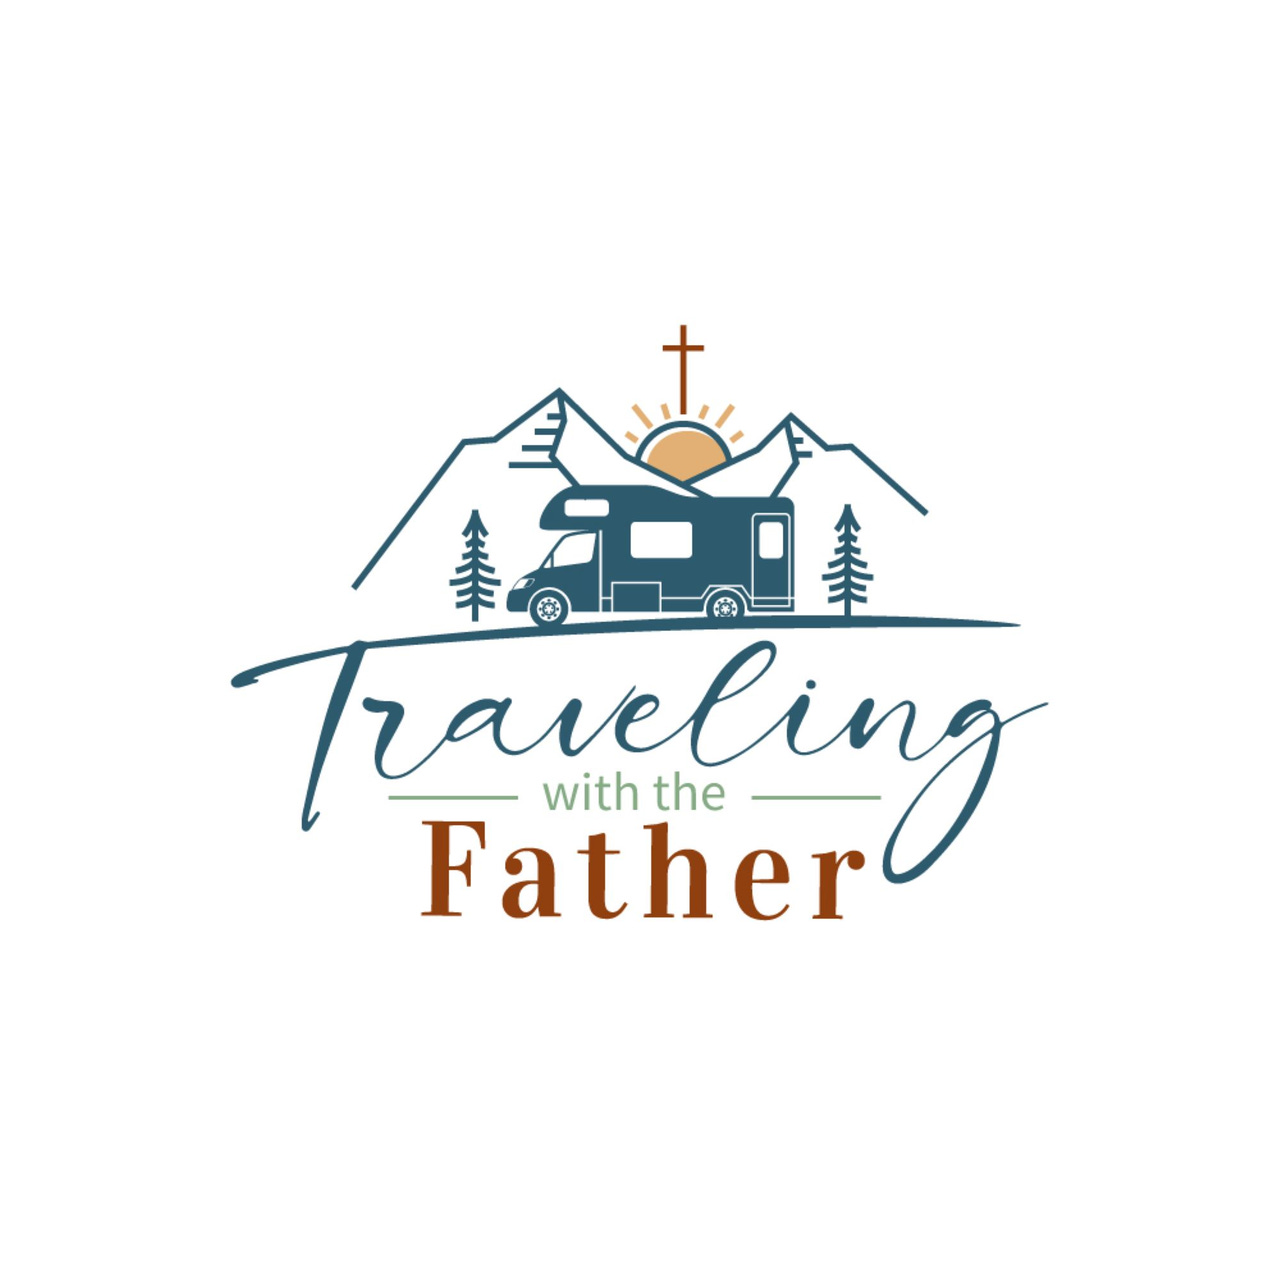 Artwork for Traveling with the Father